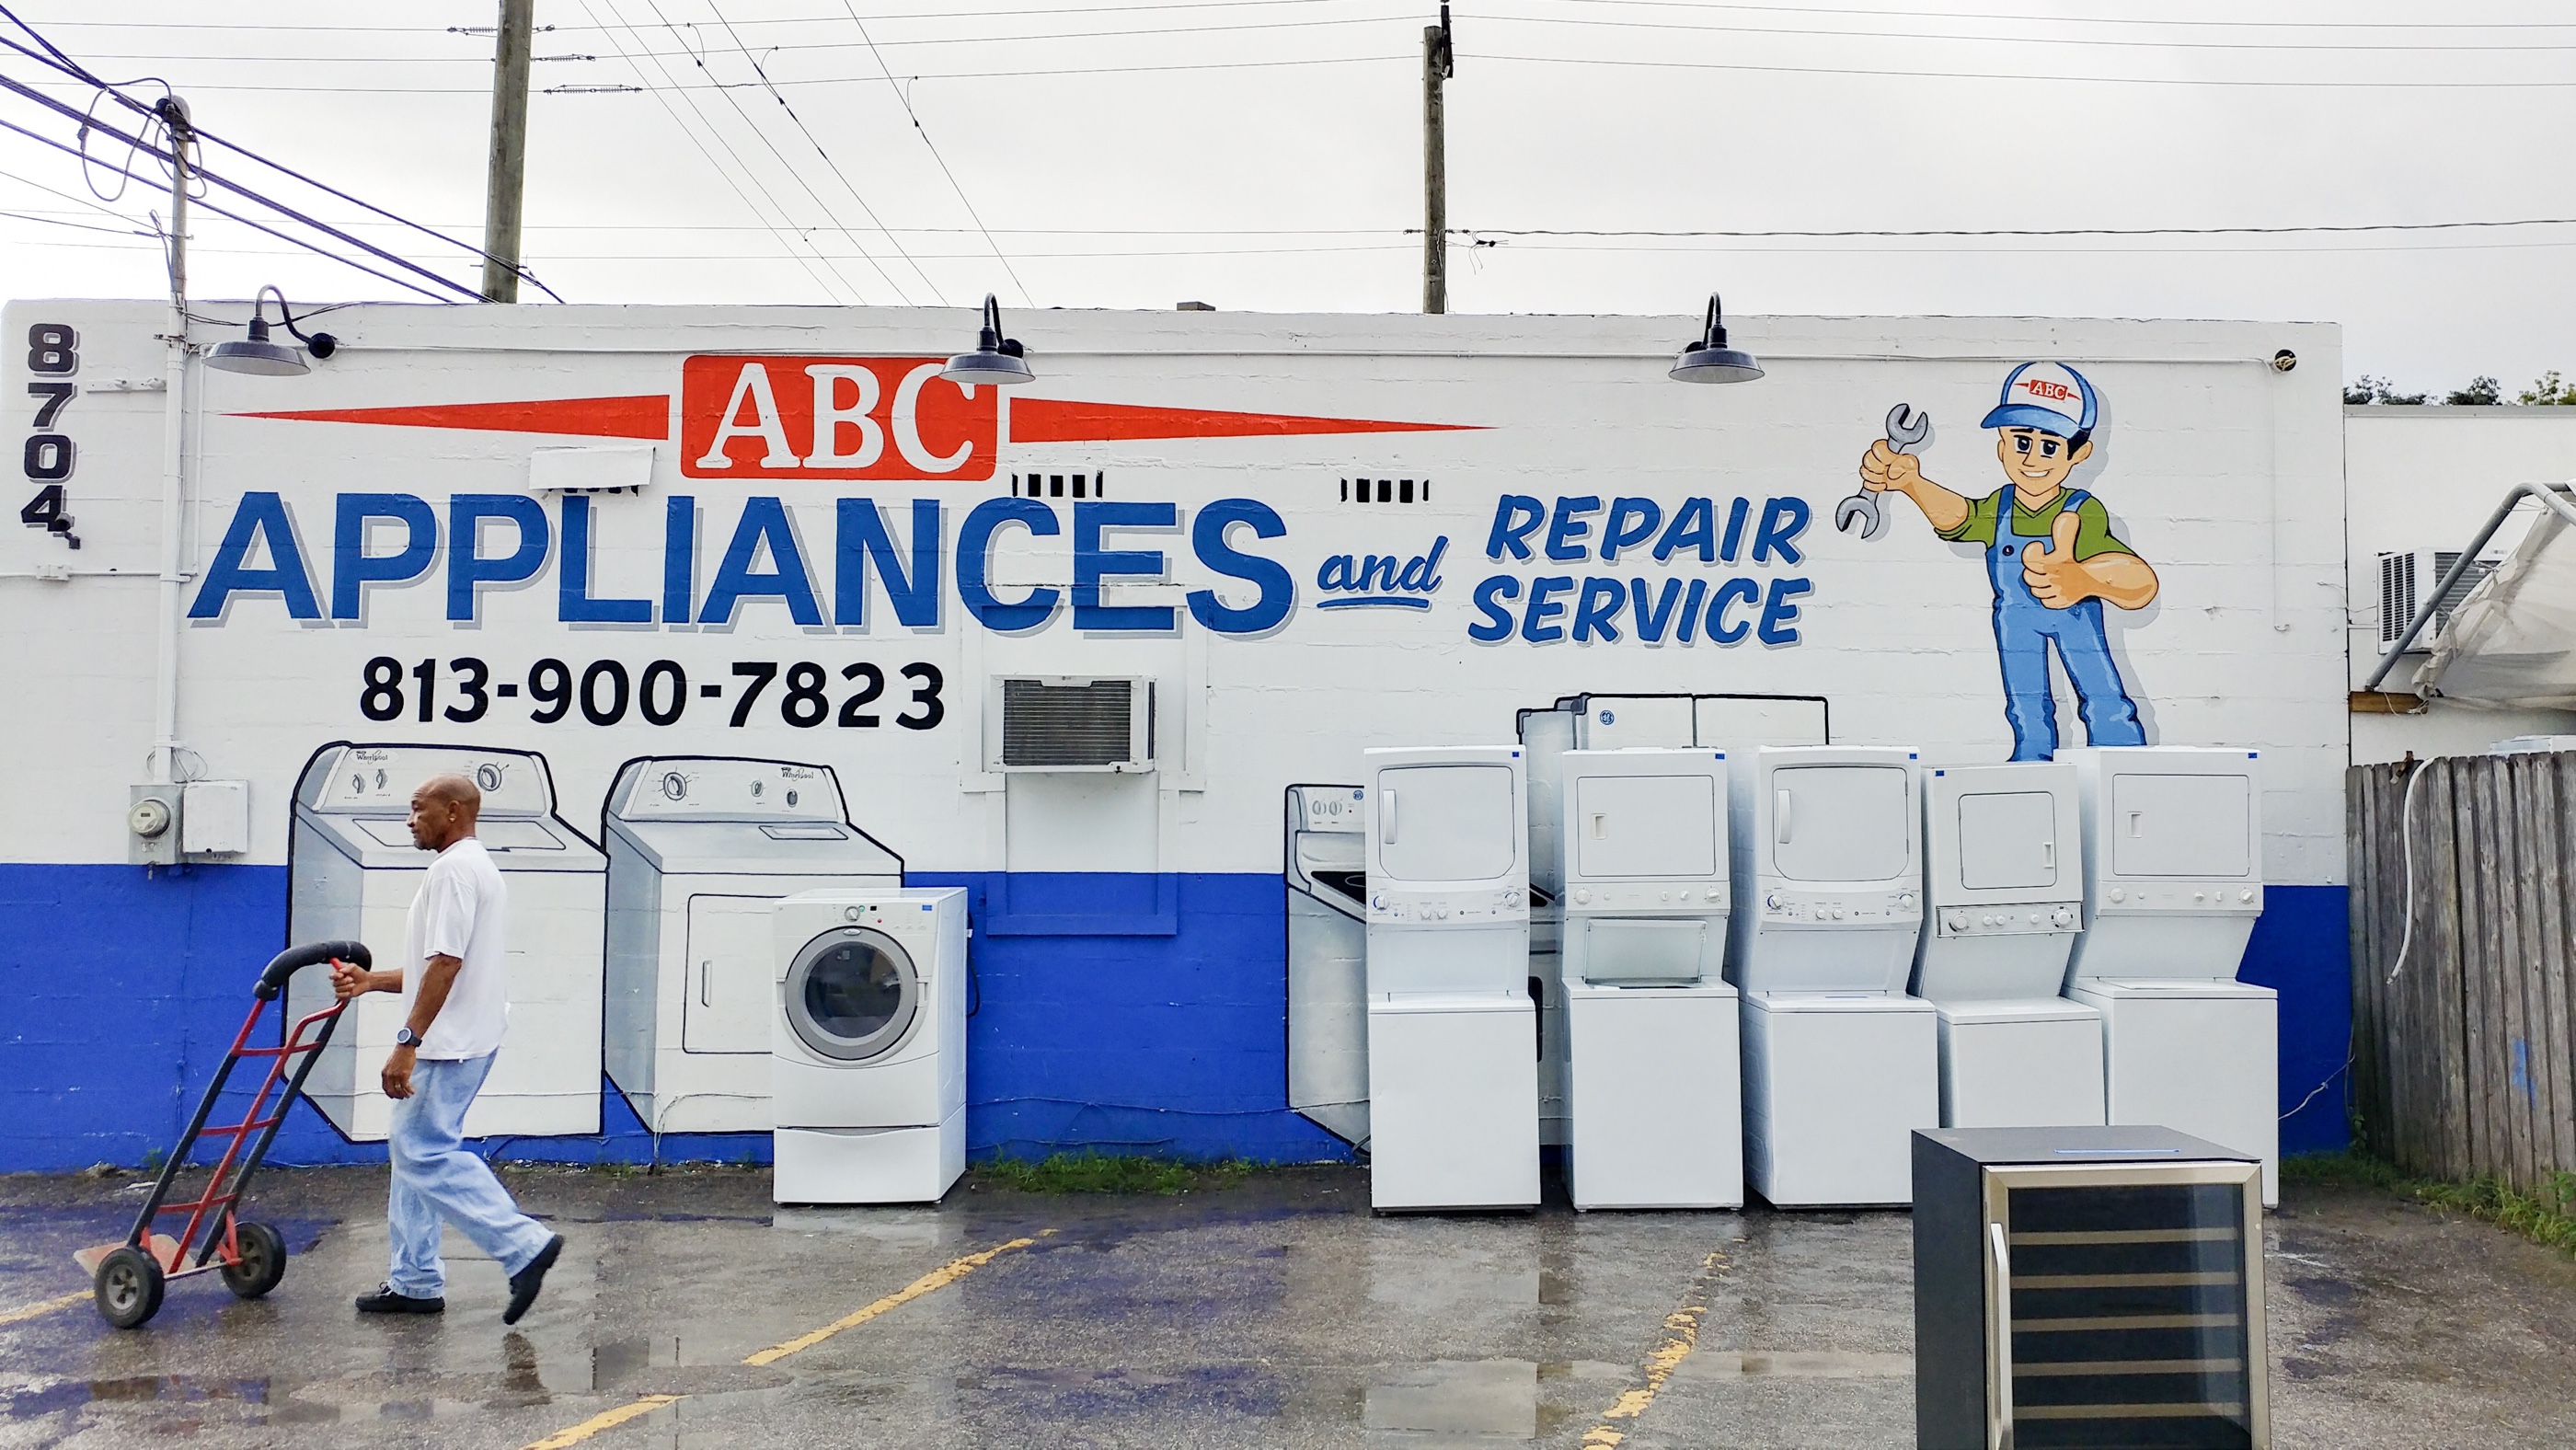 ABC Used Appliances and Repair Service in Tampa, FL